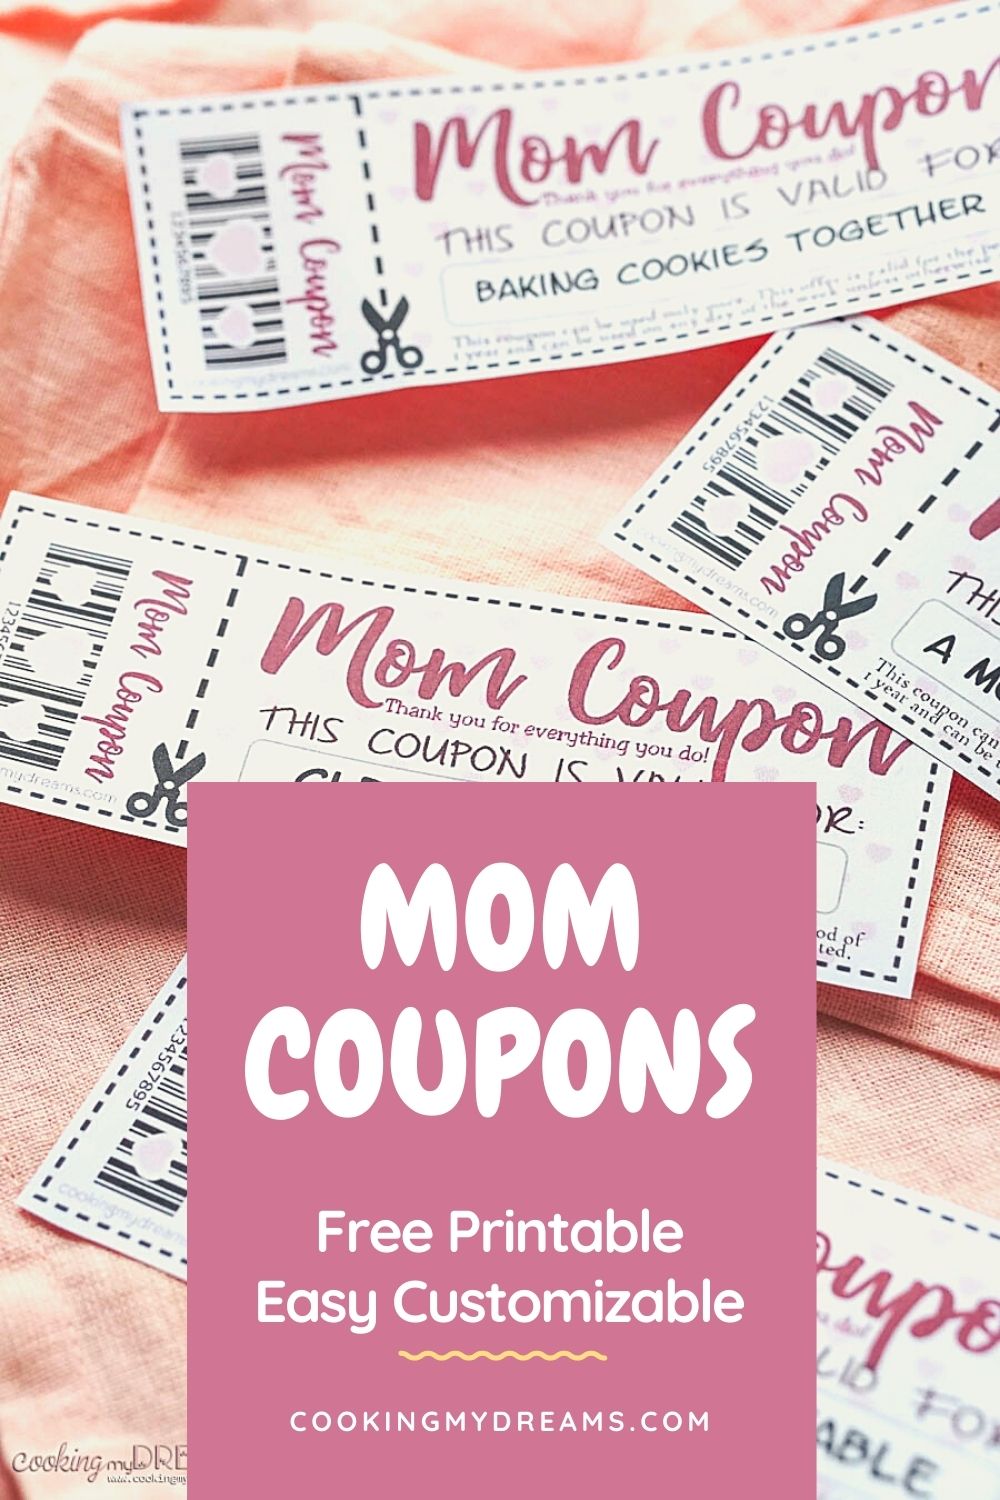 printable-mom-coupons-easy-customizable-mother-s-day-gift-cooking-my-dreams